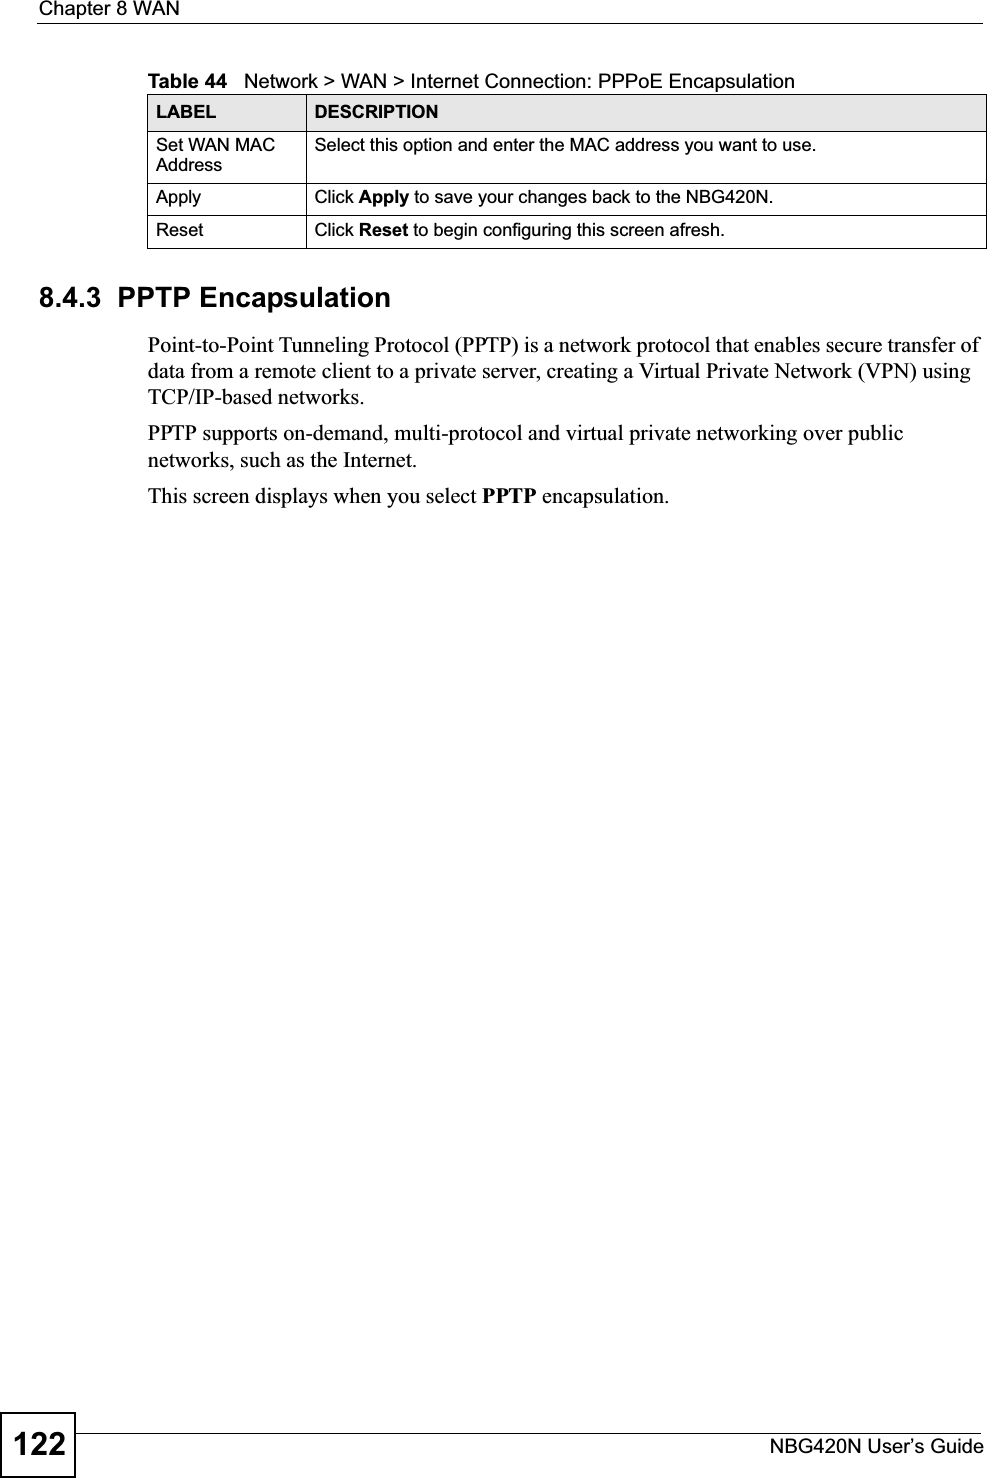 Chapter 8 WANNBG420N User’s Guide1228.4.3  PPTP EncapsulationPoint-to-Point Tunneling Protocol (PPTP) is a network protocol that enables secure transfer of data from a remote client to a private server, creating a Virtual Private Network (VPN) using TCP/IP-based networks.PPTP supports on-demand, multi-protocol and virtual private networking over public networks, such as the Internet.This screen displays when you select PPTP encapsulation.Set WAN MAC AddressSelect this option and enter the MAC address you want to use.Apply Click Apply to save your changes back to the NBG420N.Reset Click Reset to begin configuring this screen afresh.Table 44   Network &gt; WAN &gt; Internet Connection: PPPoE EncapsulationLABEL DESCRIPTION